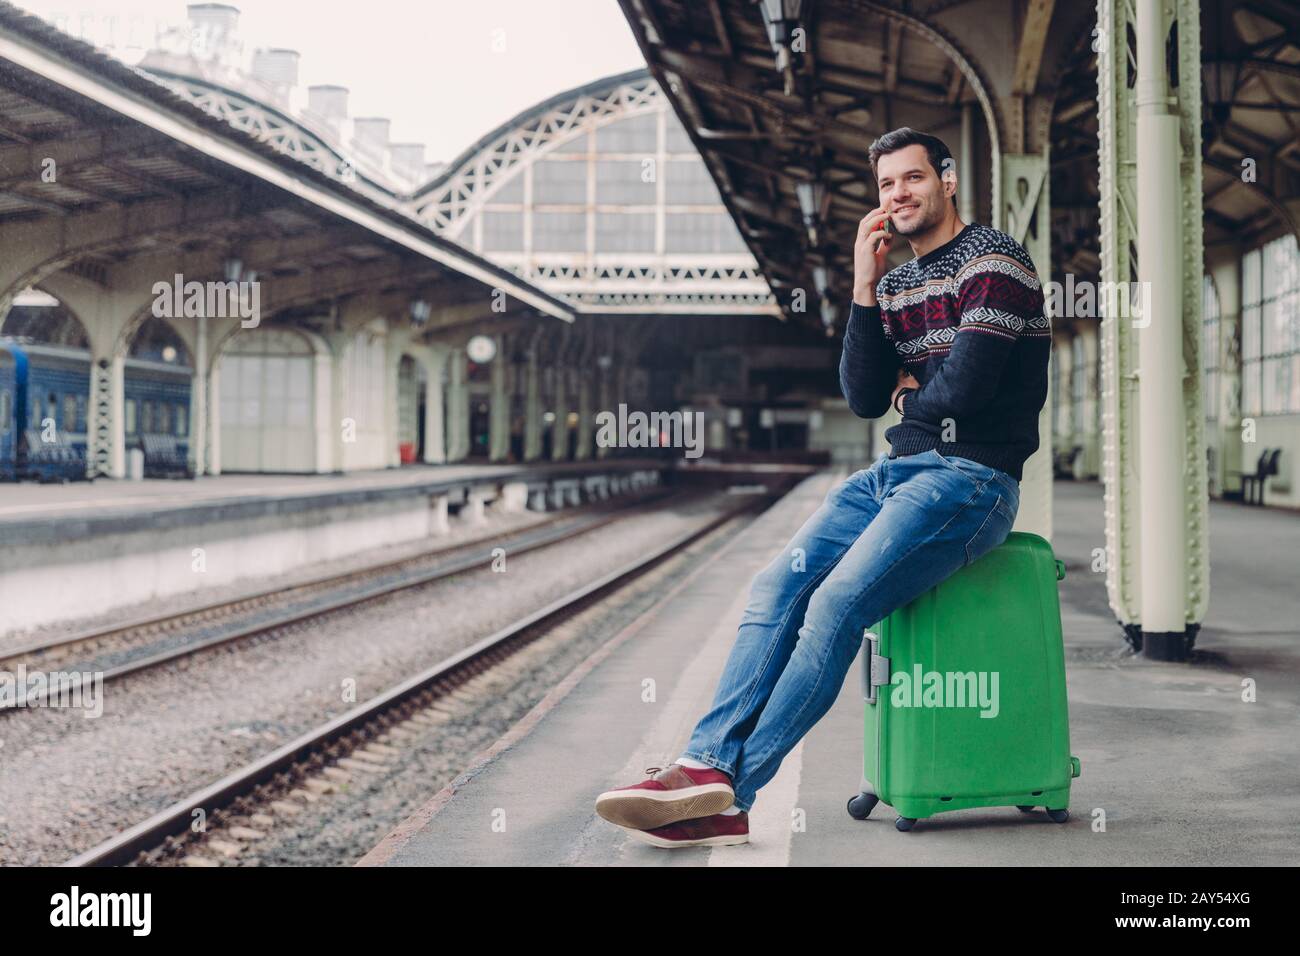 Everyday lifestyle concept. Handsome man wears sweater and jeans, poses at rail station platform, leans at bag, has telephone conversation, focused in Stock Photo